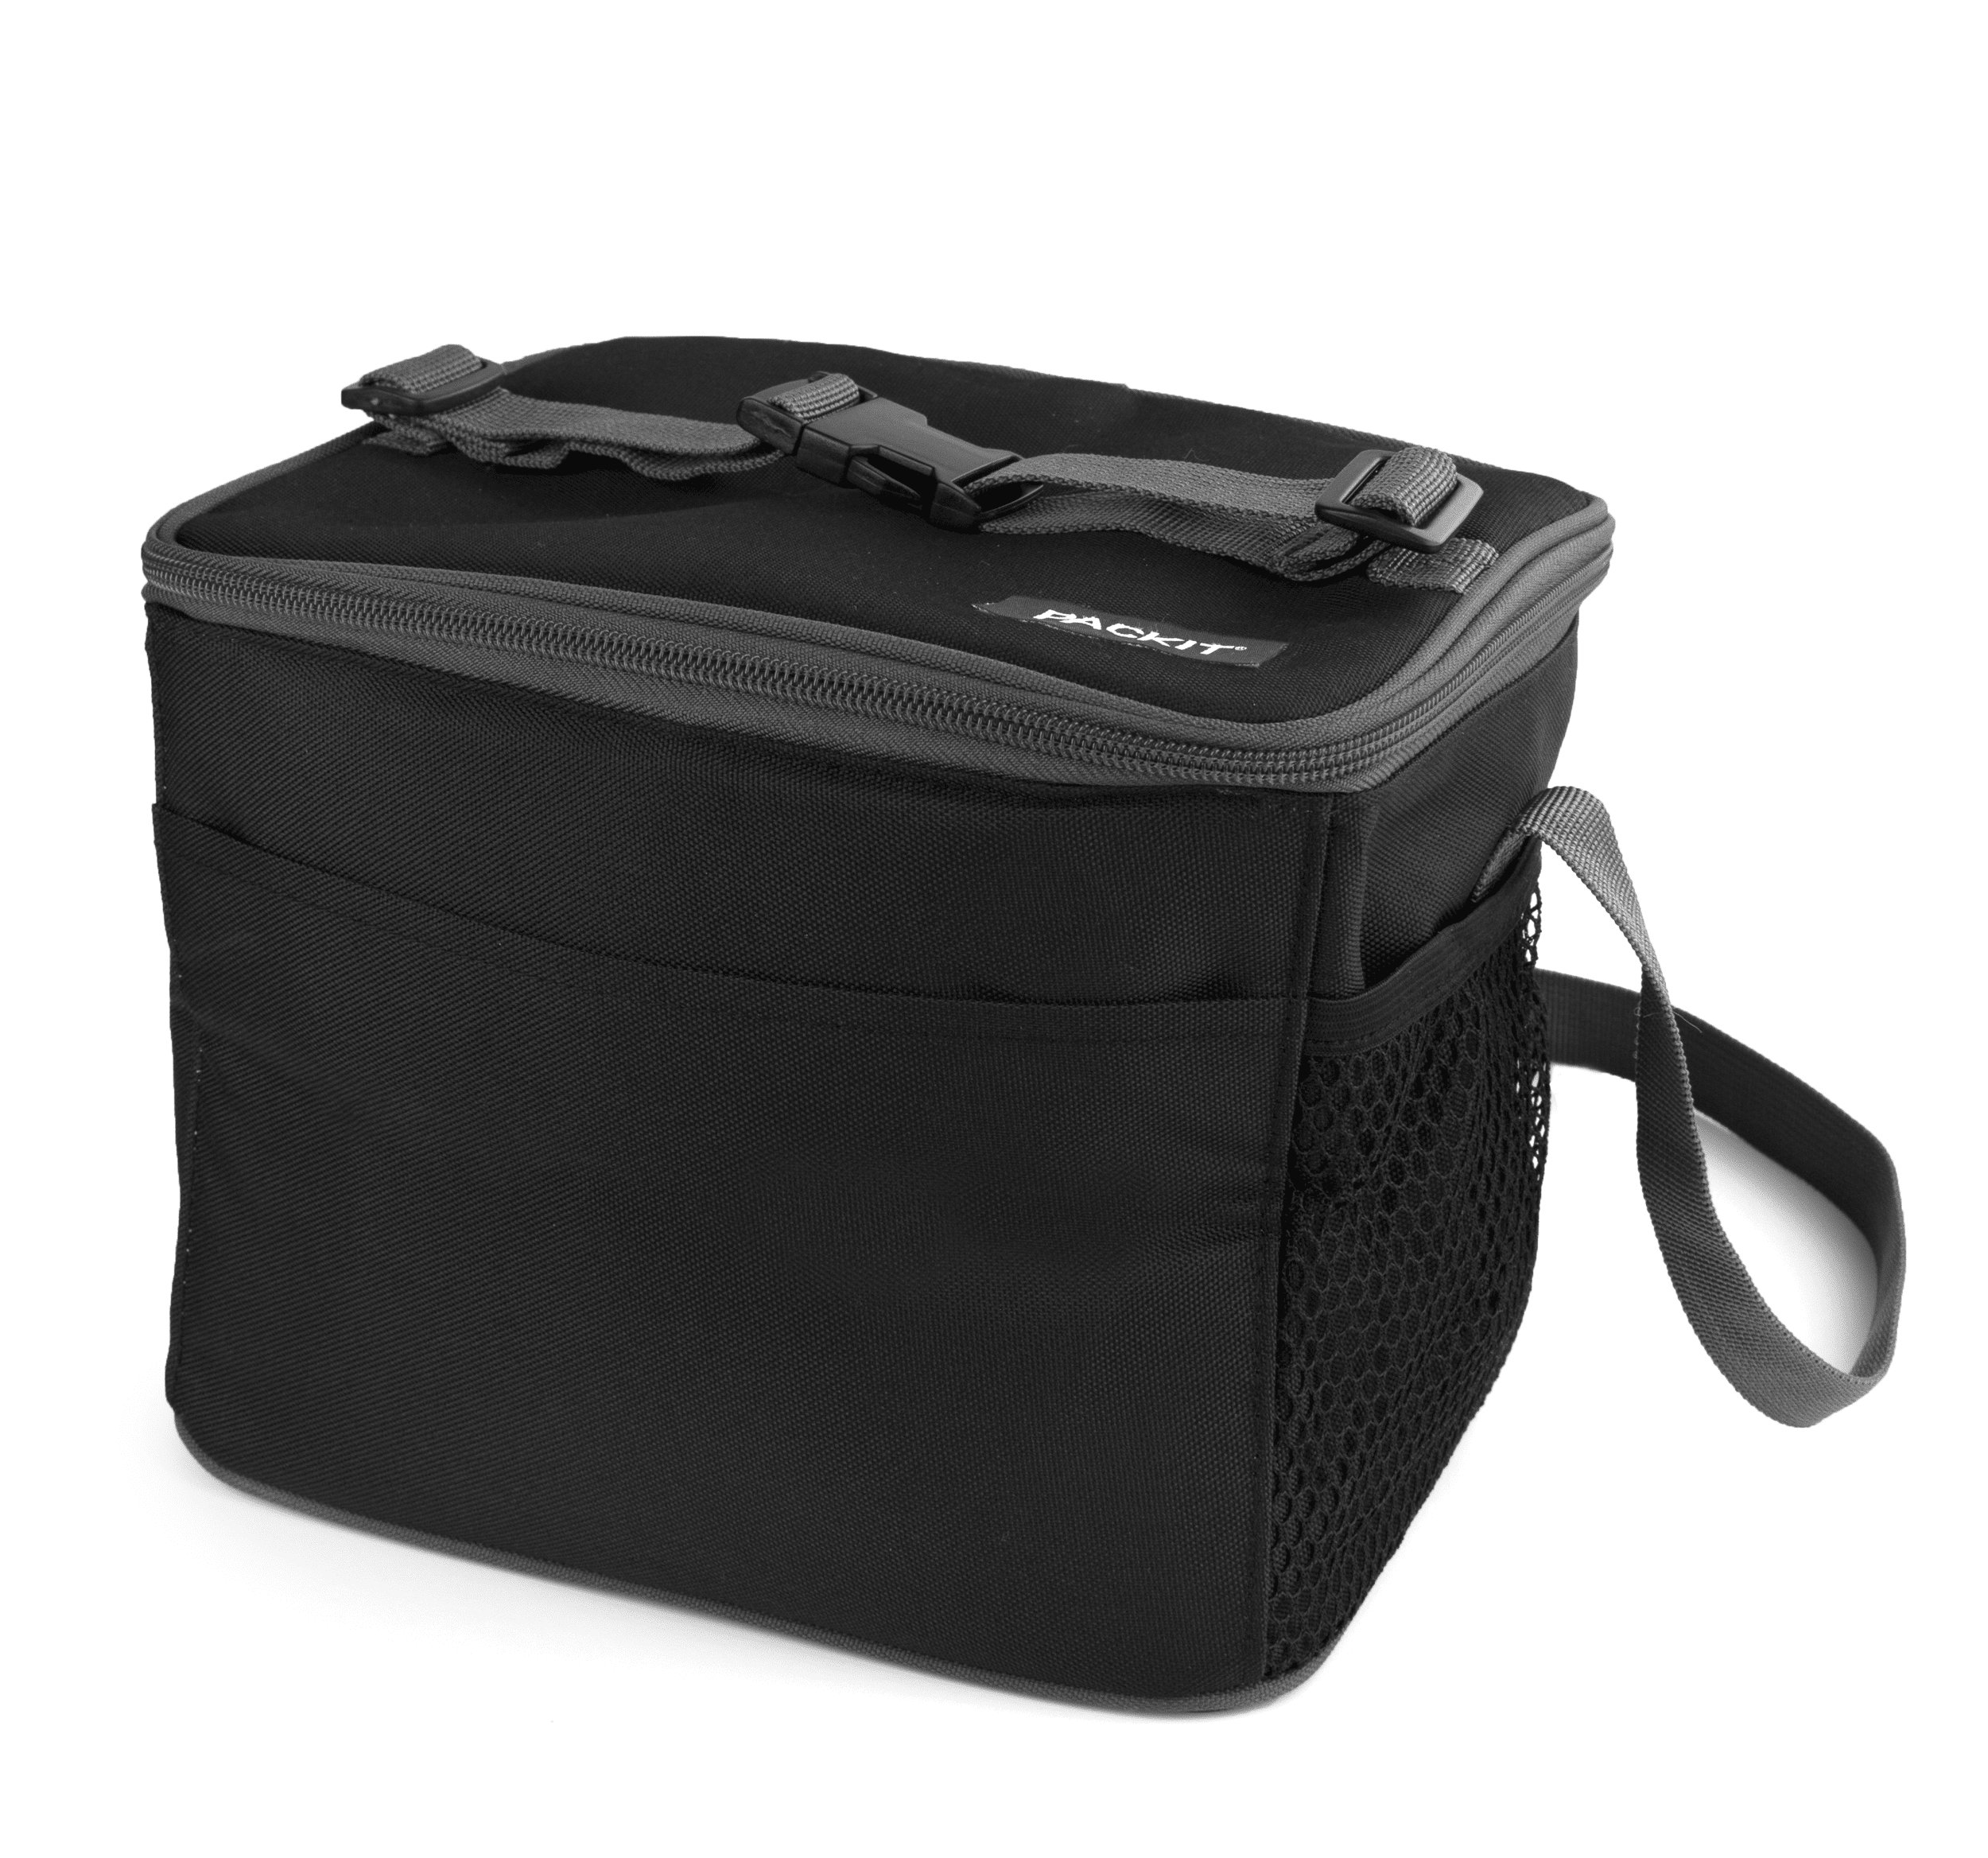 Packit Durable Freezable Gel Lunch Cooler Holds 9 cans, Black